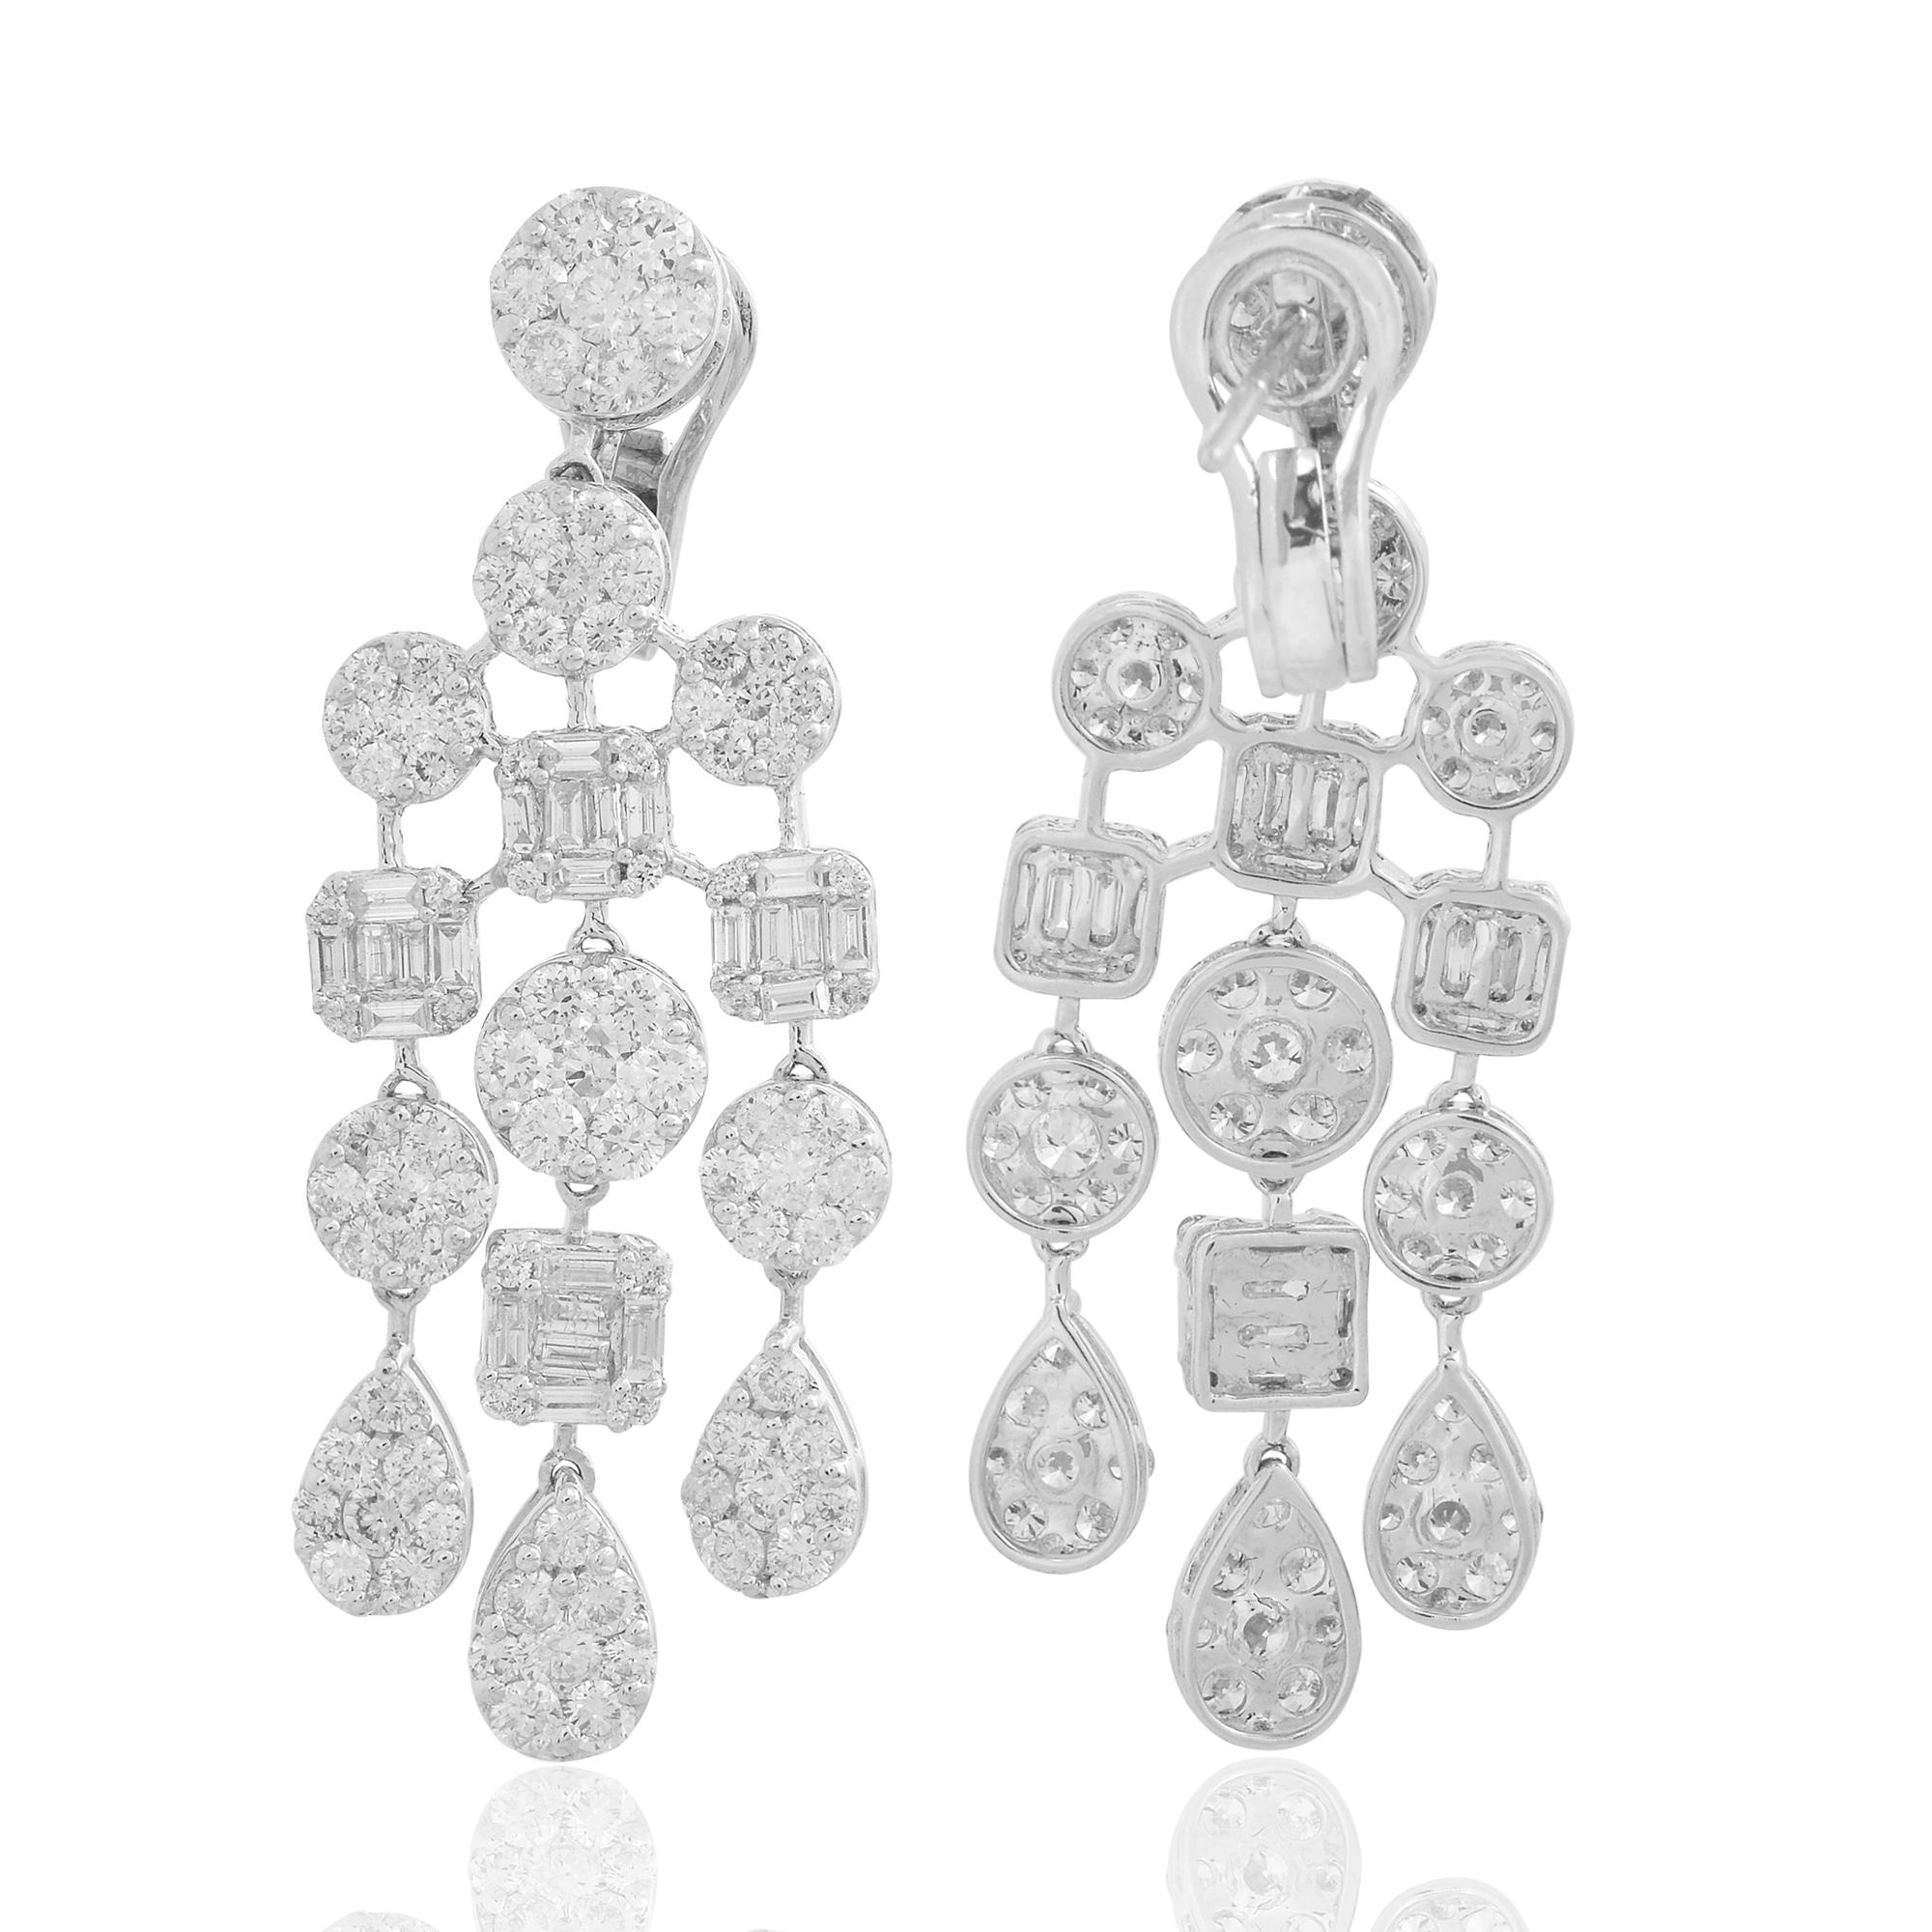 Item Code :- CN-25178A
Gross Wt. :- 16.02 gm
18k Solid White Gold Wt. :- 14.30 gm
Natural Diamond Wt. :- 8.60 Ct. ( AVERAGE DIAMOND CLARITY SI1-SI2 & COLOR H-I )
Earrings Size :- 50.29 x 19.25 mm approx.

✦ Sizing
.....................
We can adjust